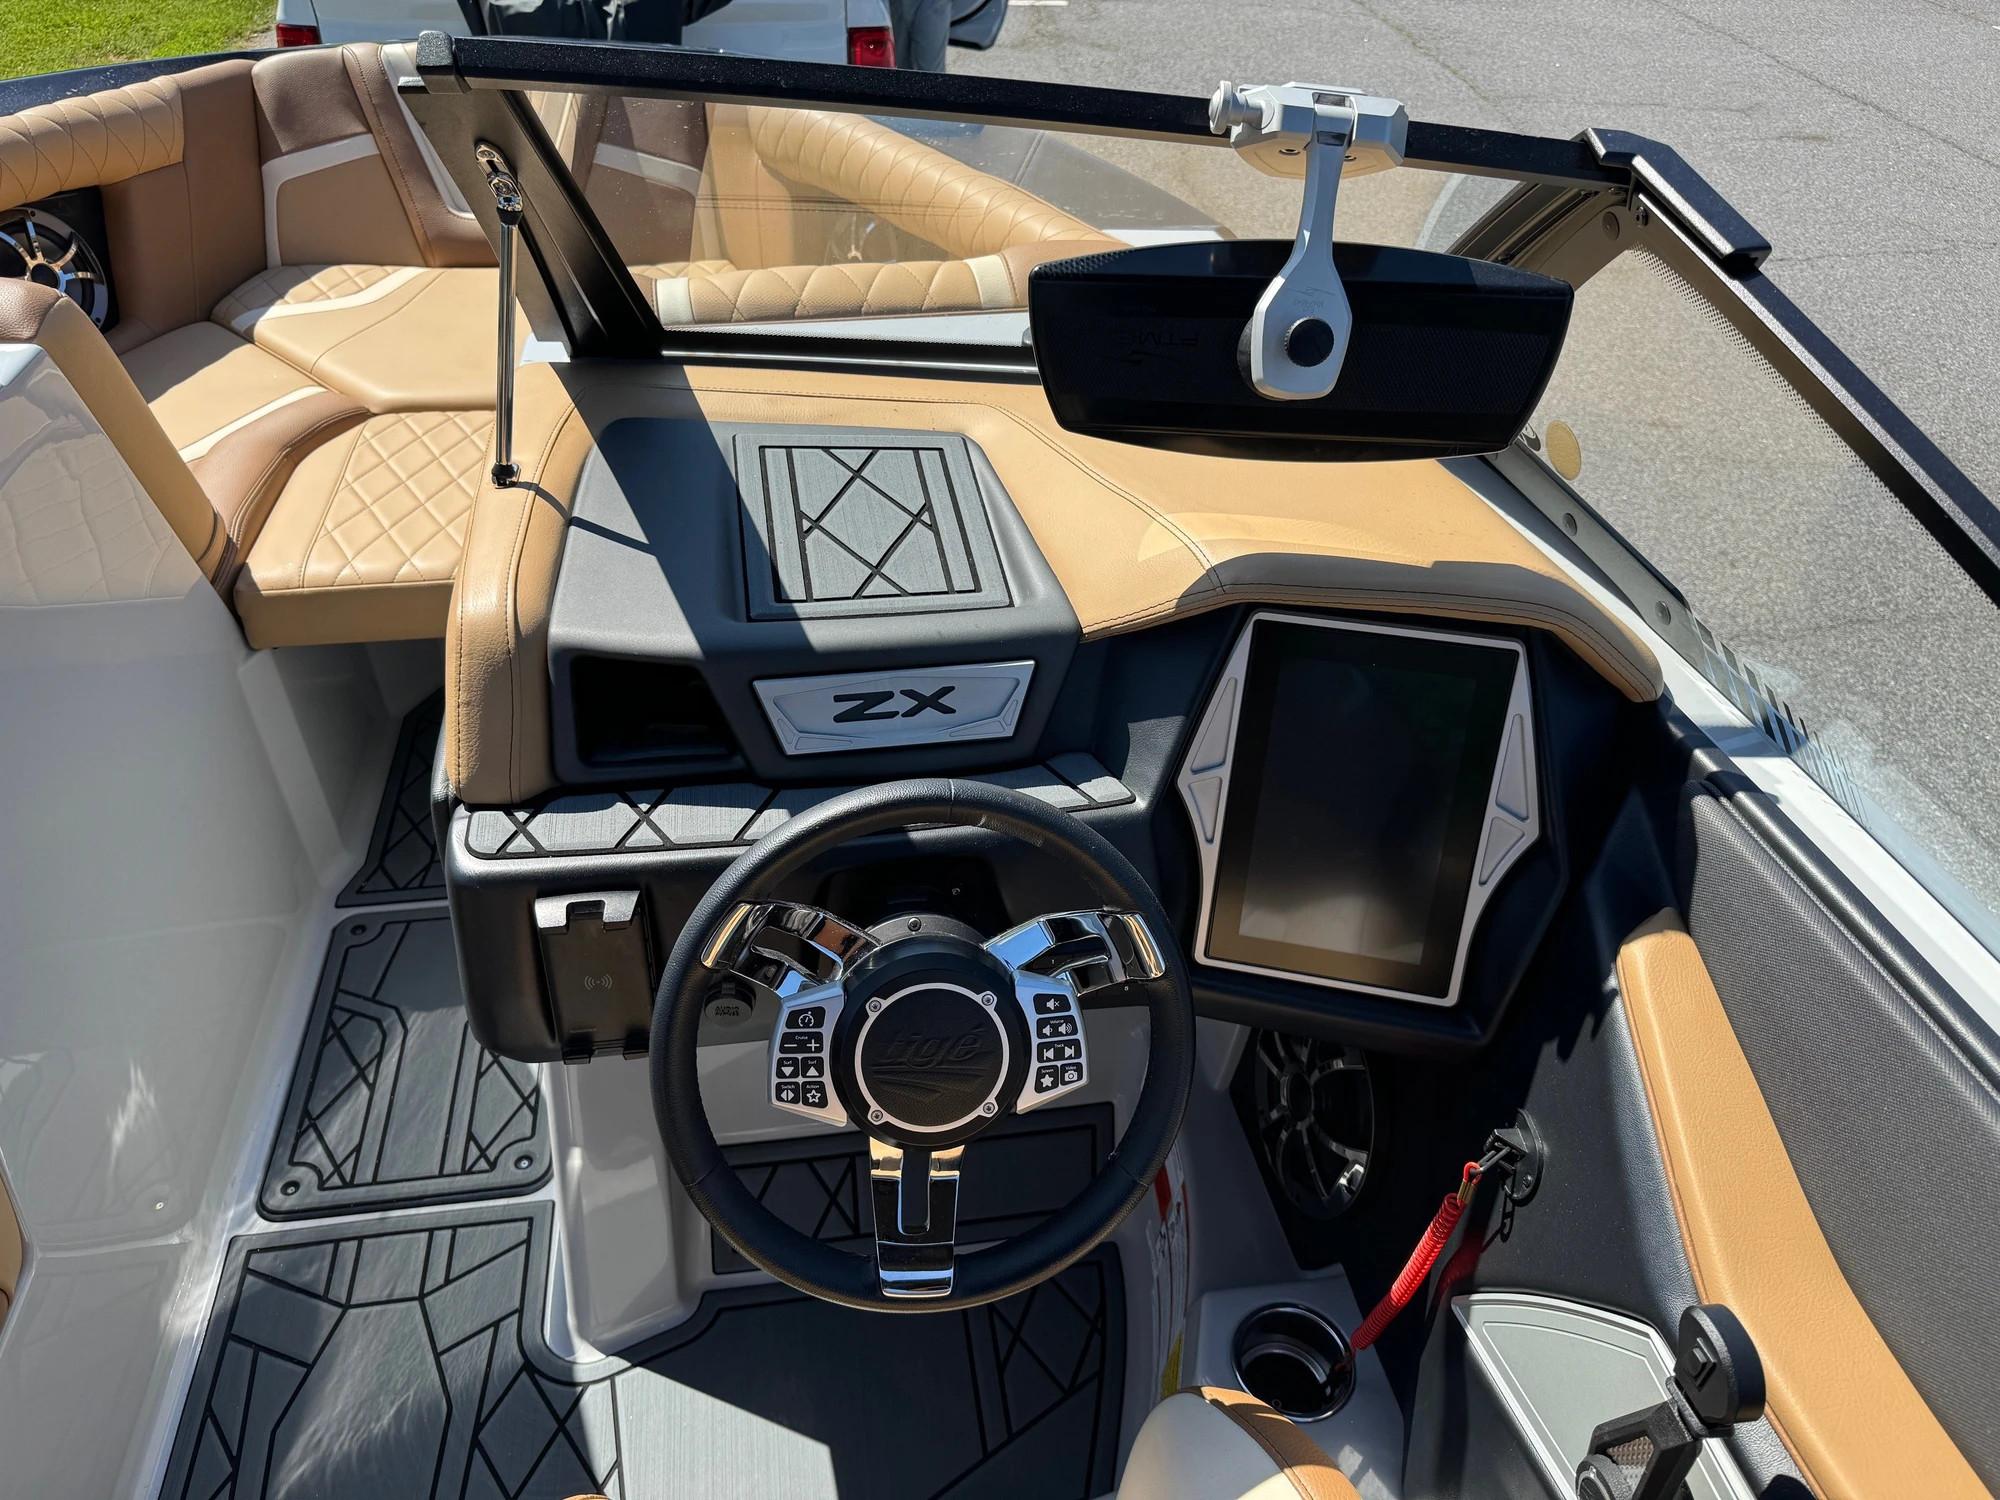 2021 Tigé 21 ZX Ski and Wakeboard for sale - YachtWorld